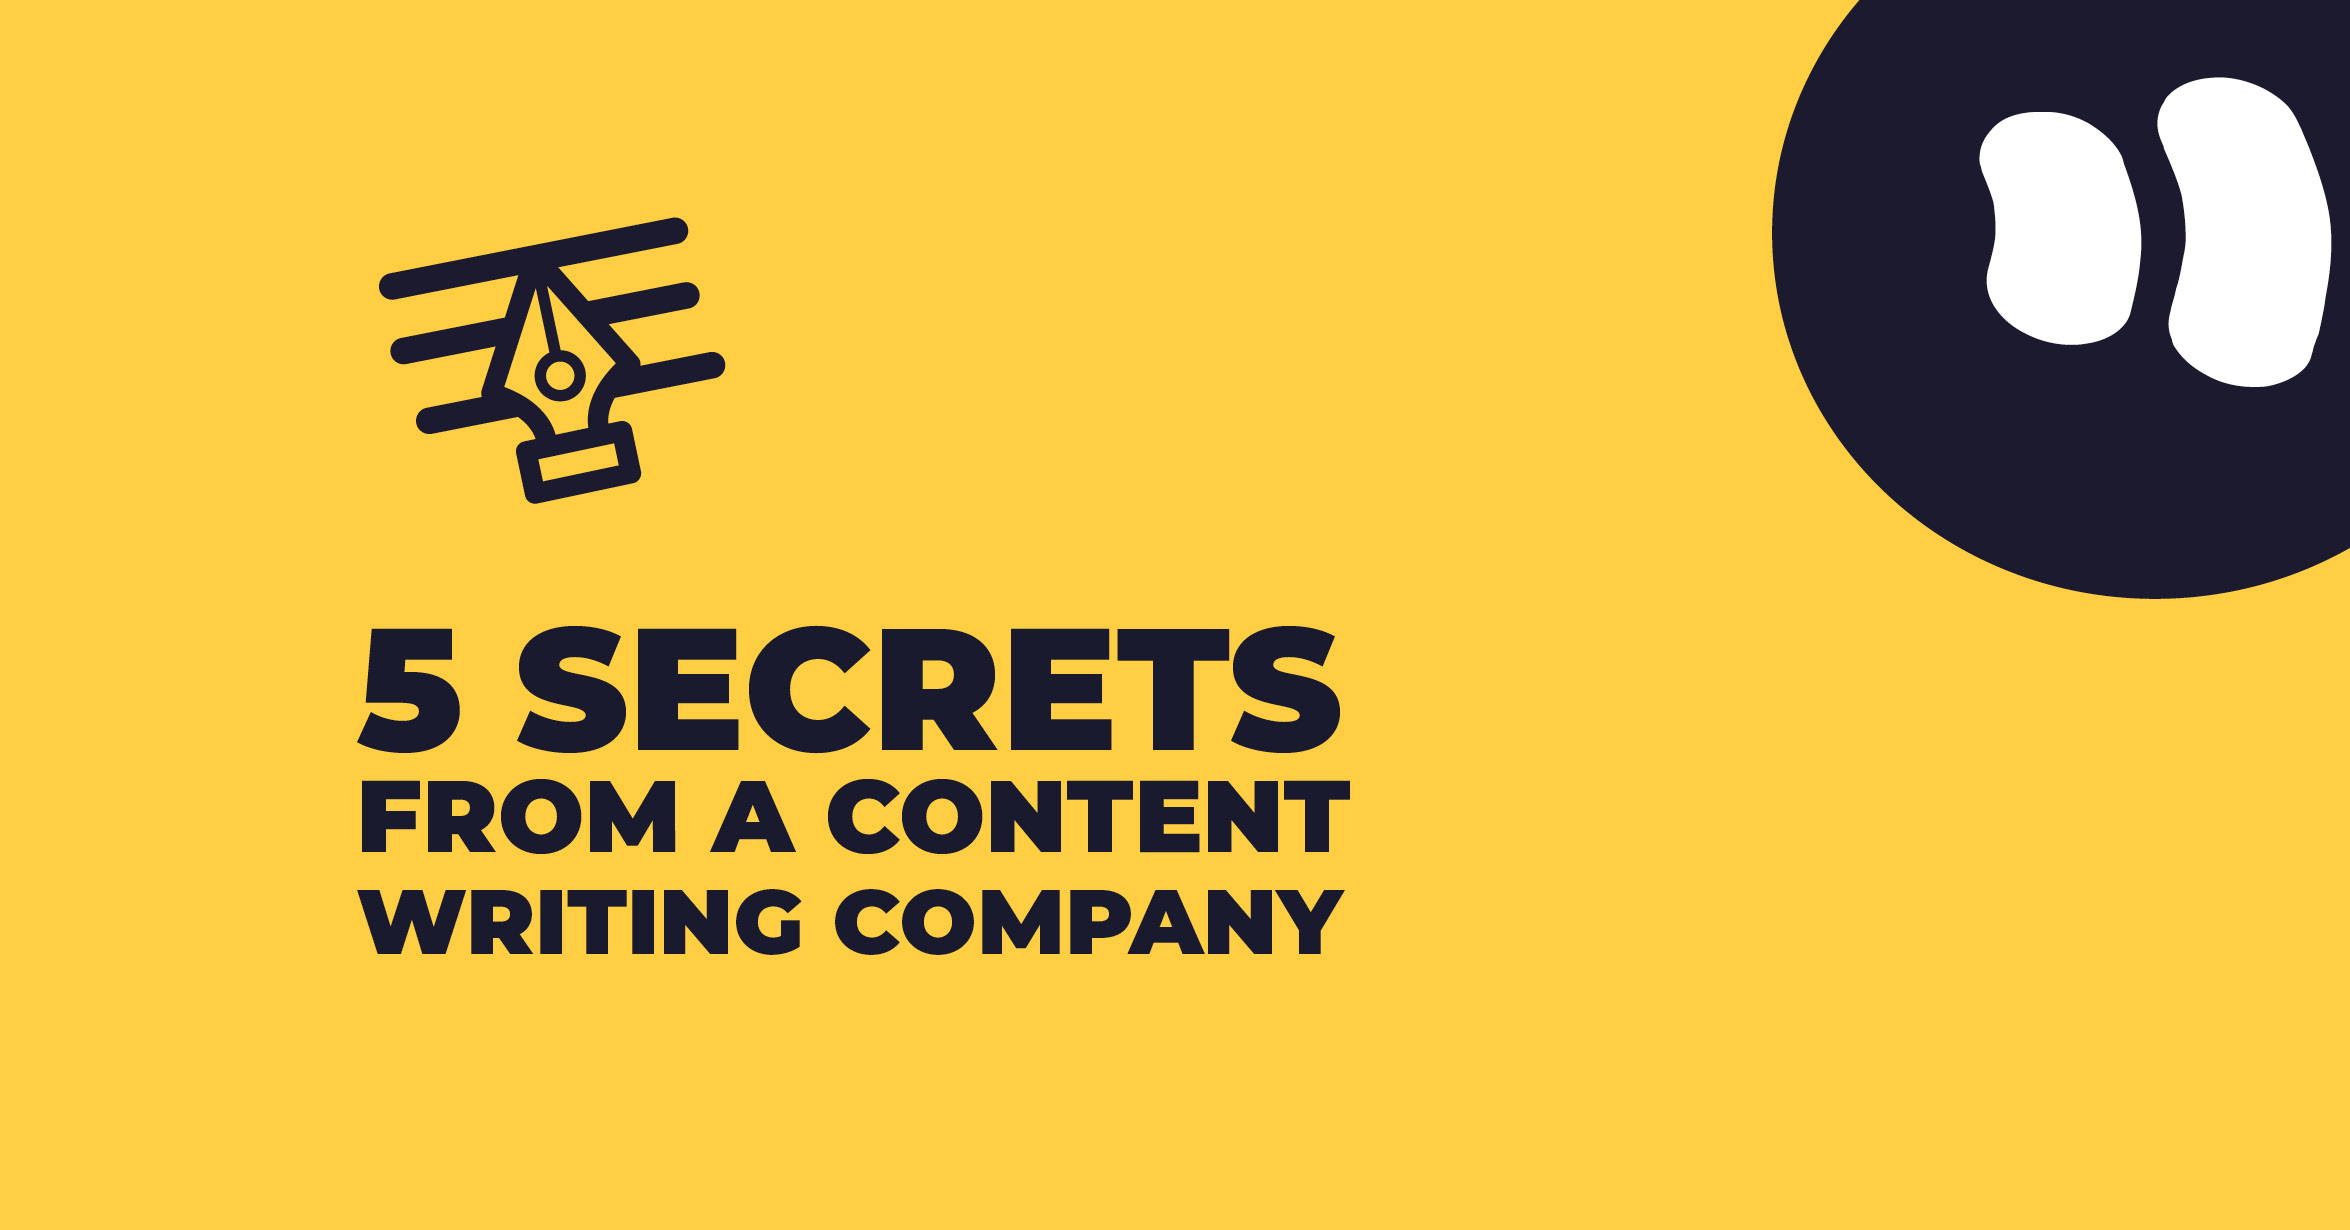 5 Tips From a Content Writing Company